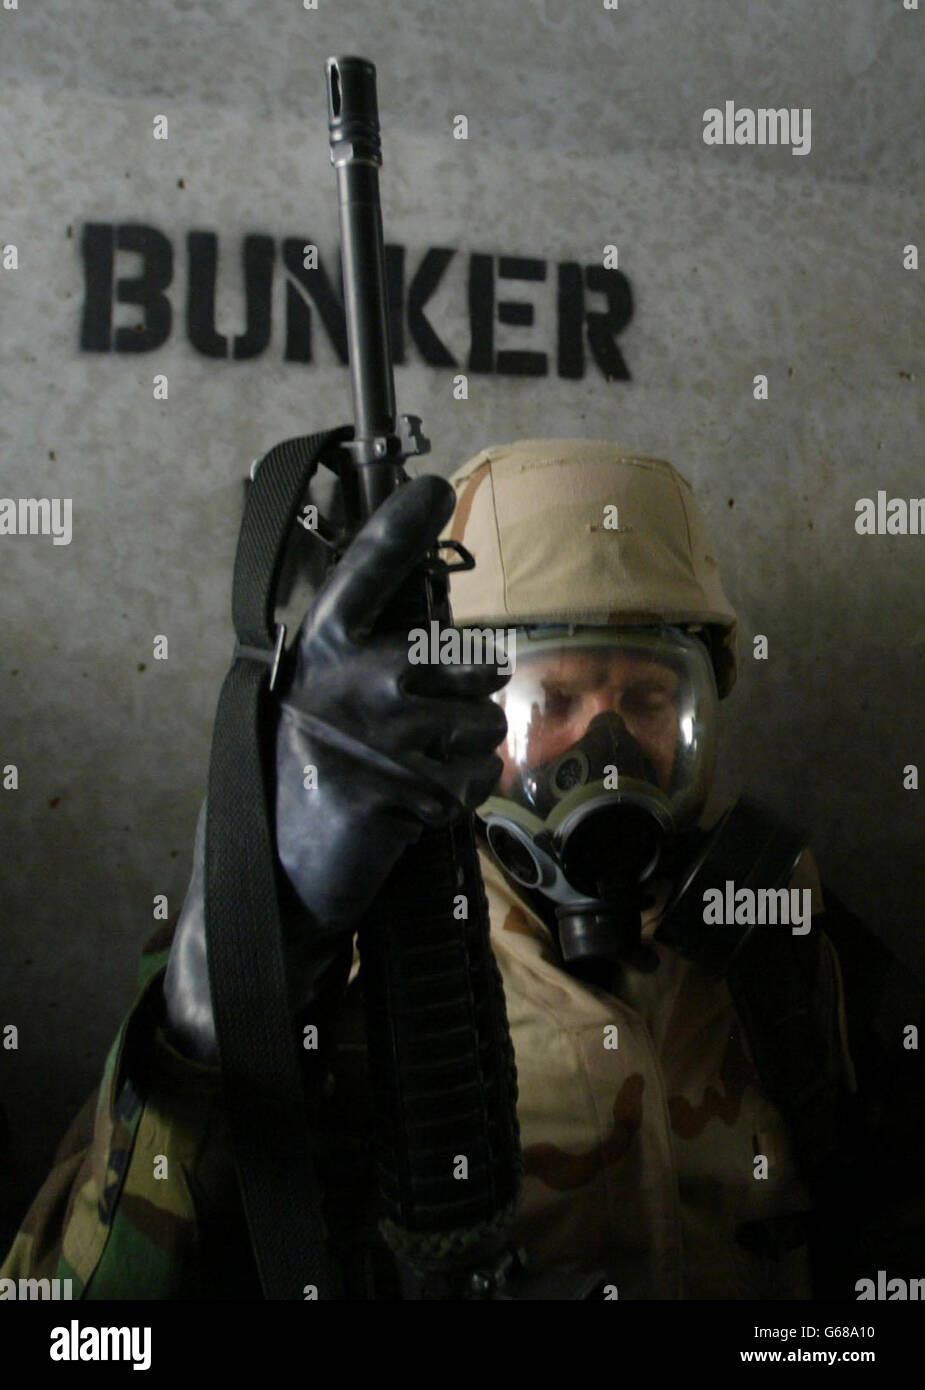 A U.S. Marine closes his eyes as he waits in a full nuclear biological and chemical protection suit in a bunker at a desert base in Kuwait after a warning of a second scud missile attack from Iraq. * Iraq fired missiles at Kuwait, prompting U.S. troops to don chemical protective suits and setting emergency air raid sirens blaring in Kuwait City. Stock Photo